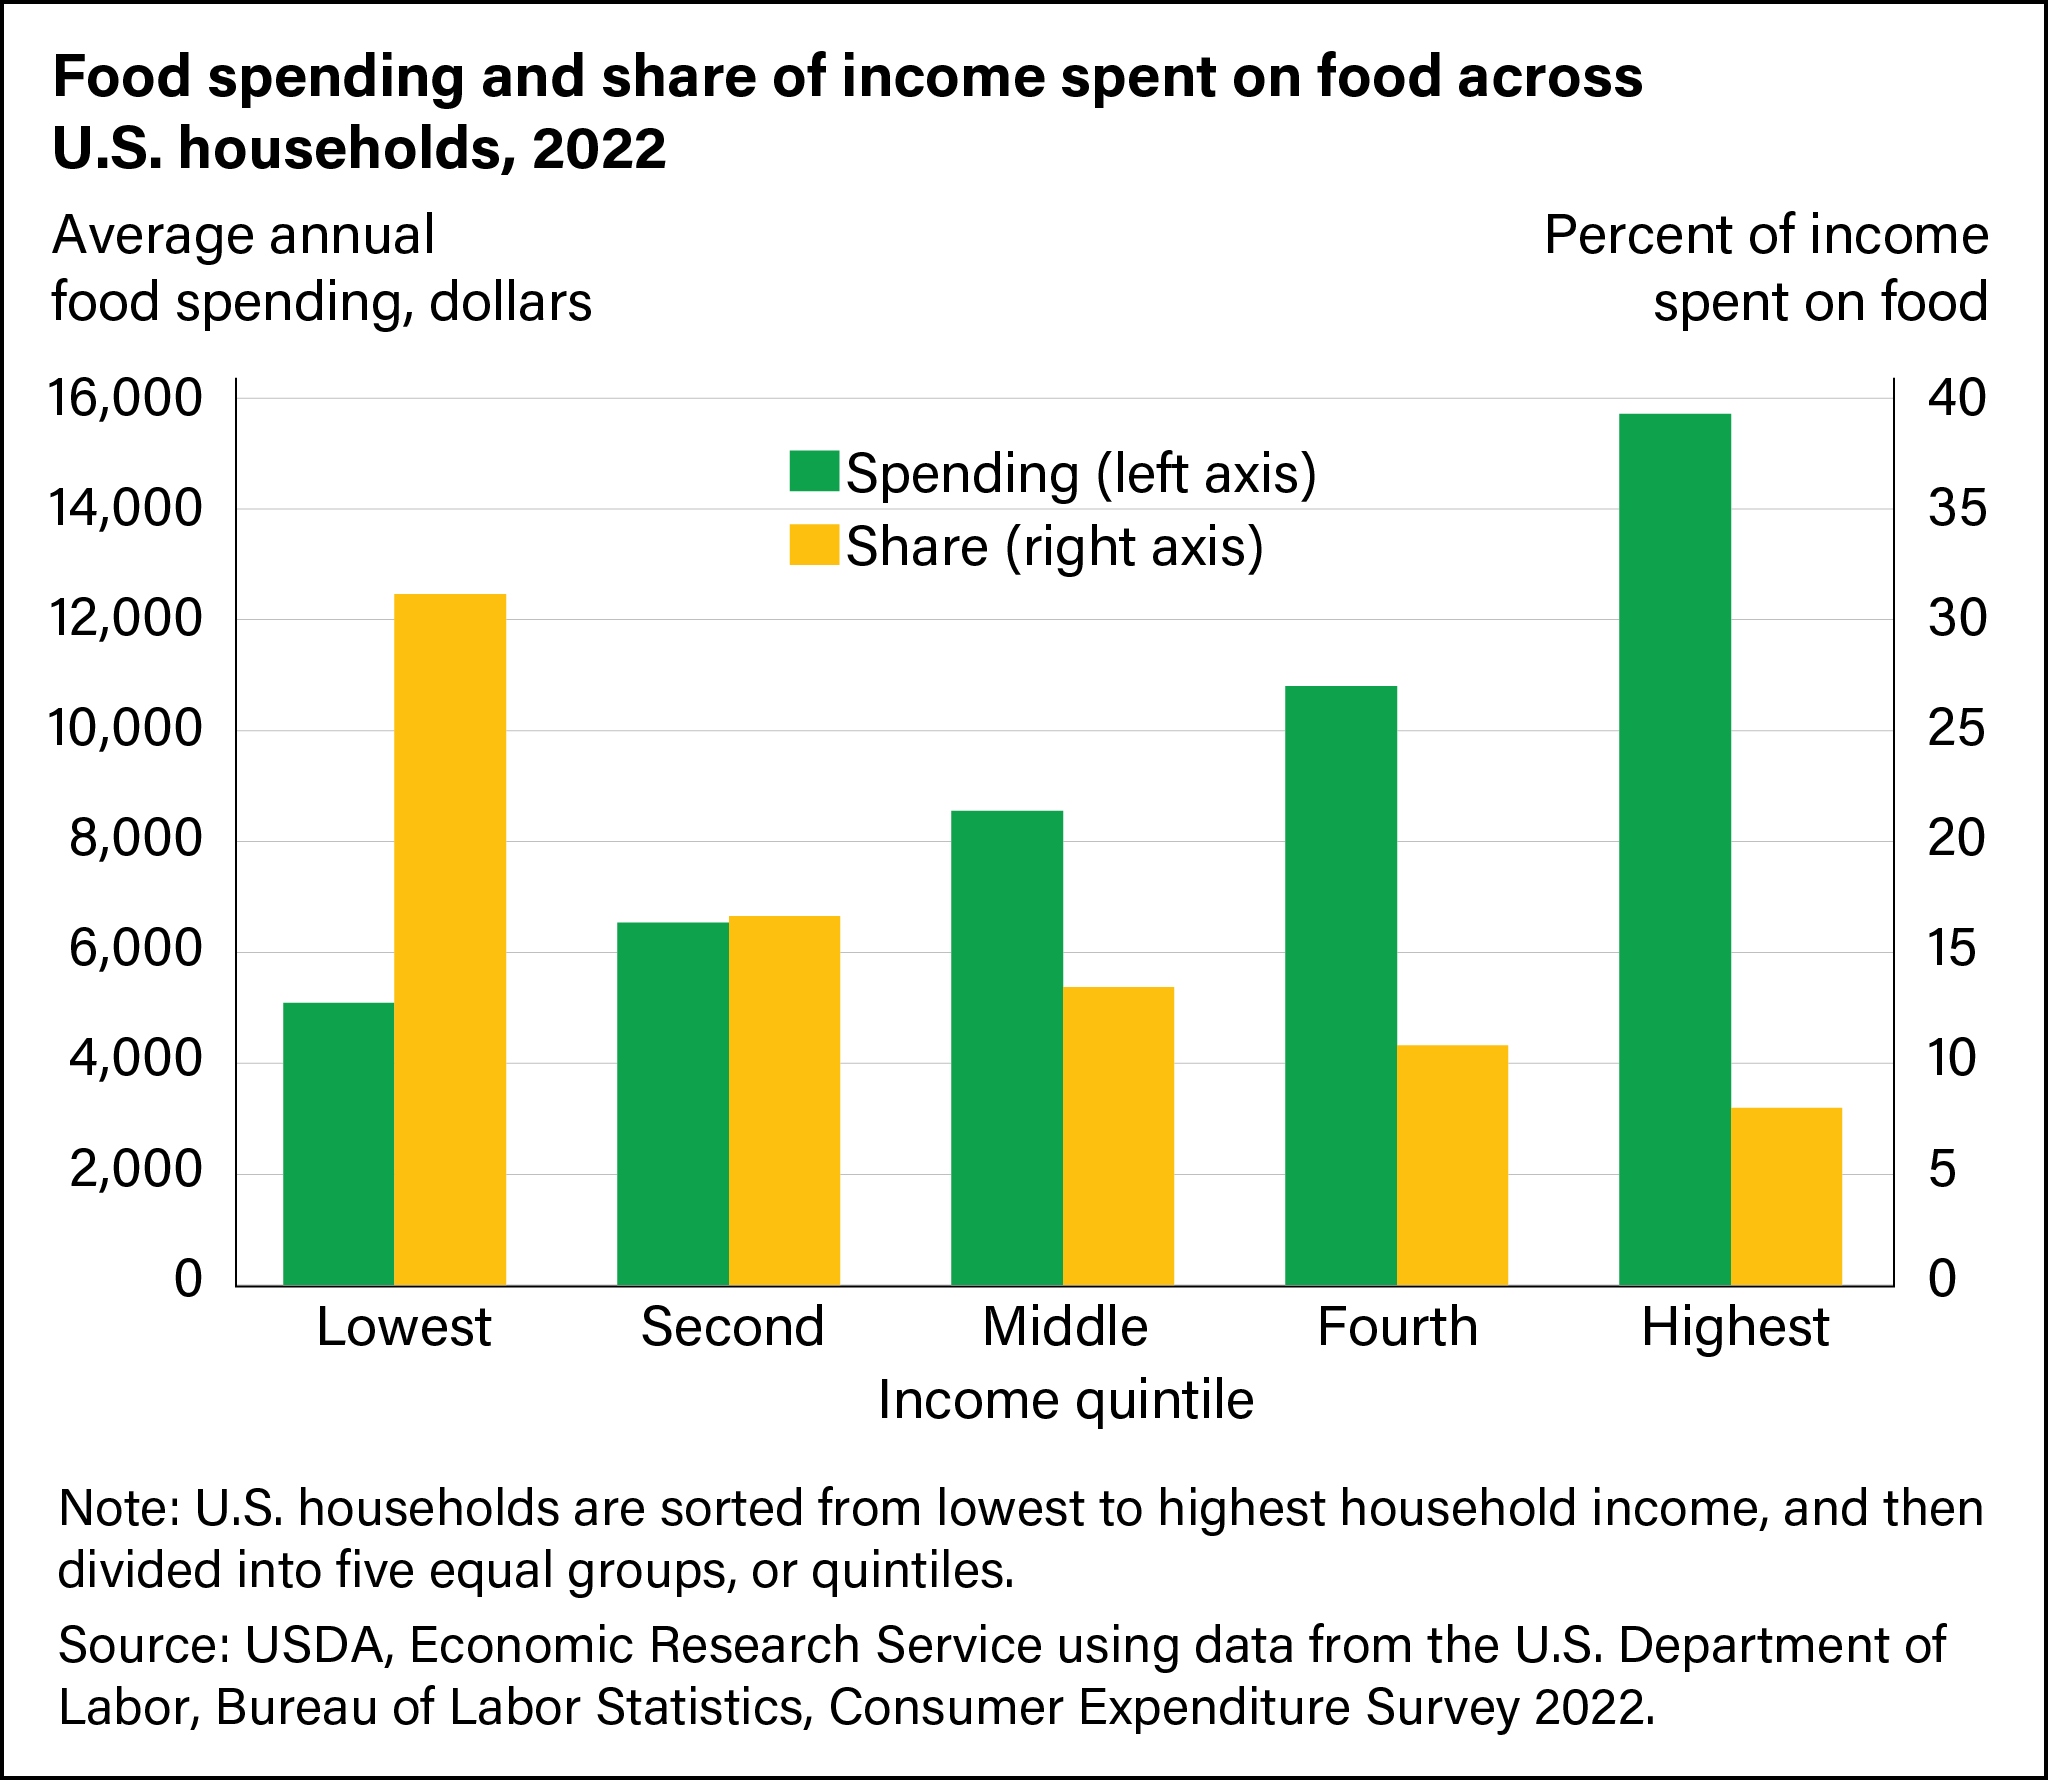 As their incomes rise, households spend more money on food but it represents a smaller overall budget share. In 2018, households in the lowest income quintile spent an average of $4,109 on food, representing 35.1 percent of income, while households in the highest income quintile spent an average of $13,348 on food, representing 8.2 percent of income. Source: USDA